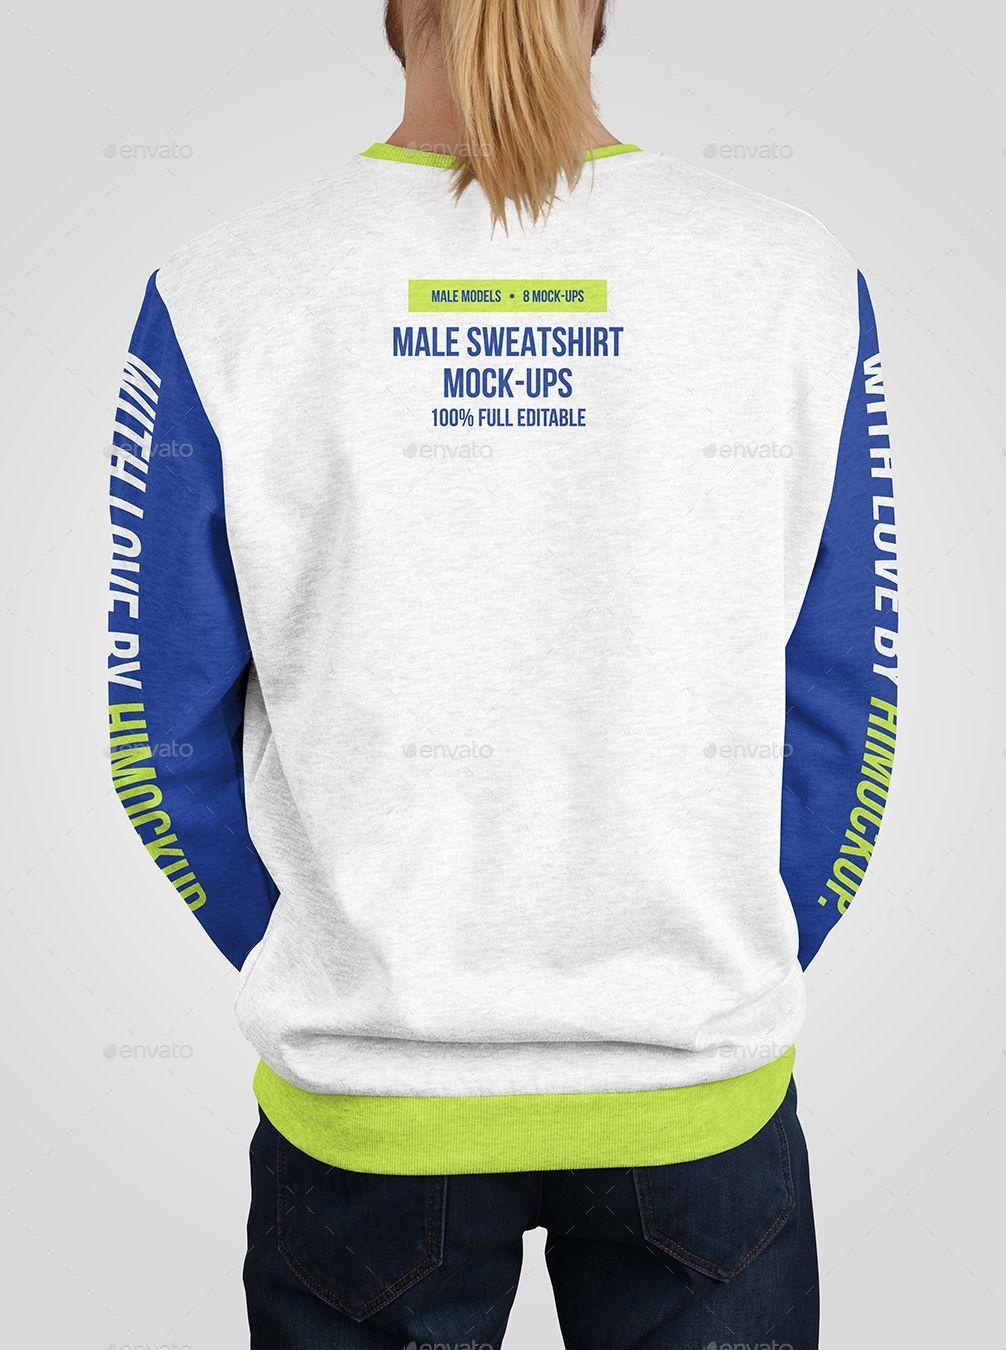 Clothing and Apparel Up Logo - Male Sweatshirt Mockups. Apparel. Sweatshirts, Mockup, Shirts